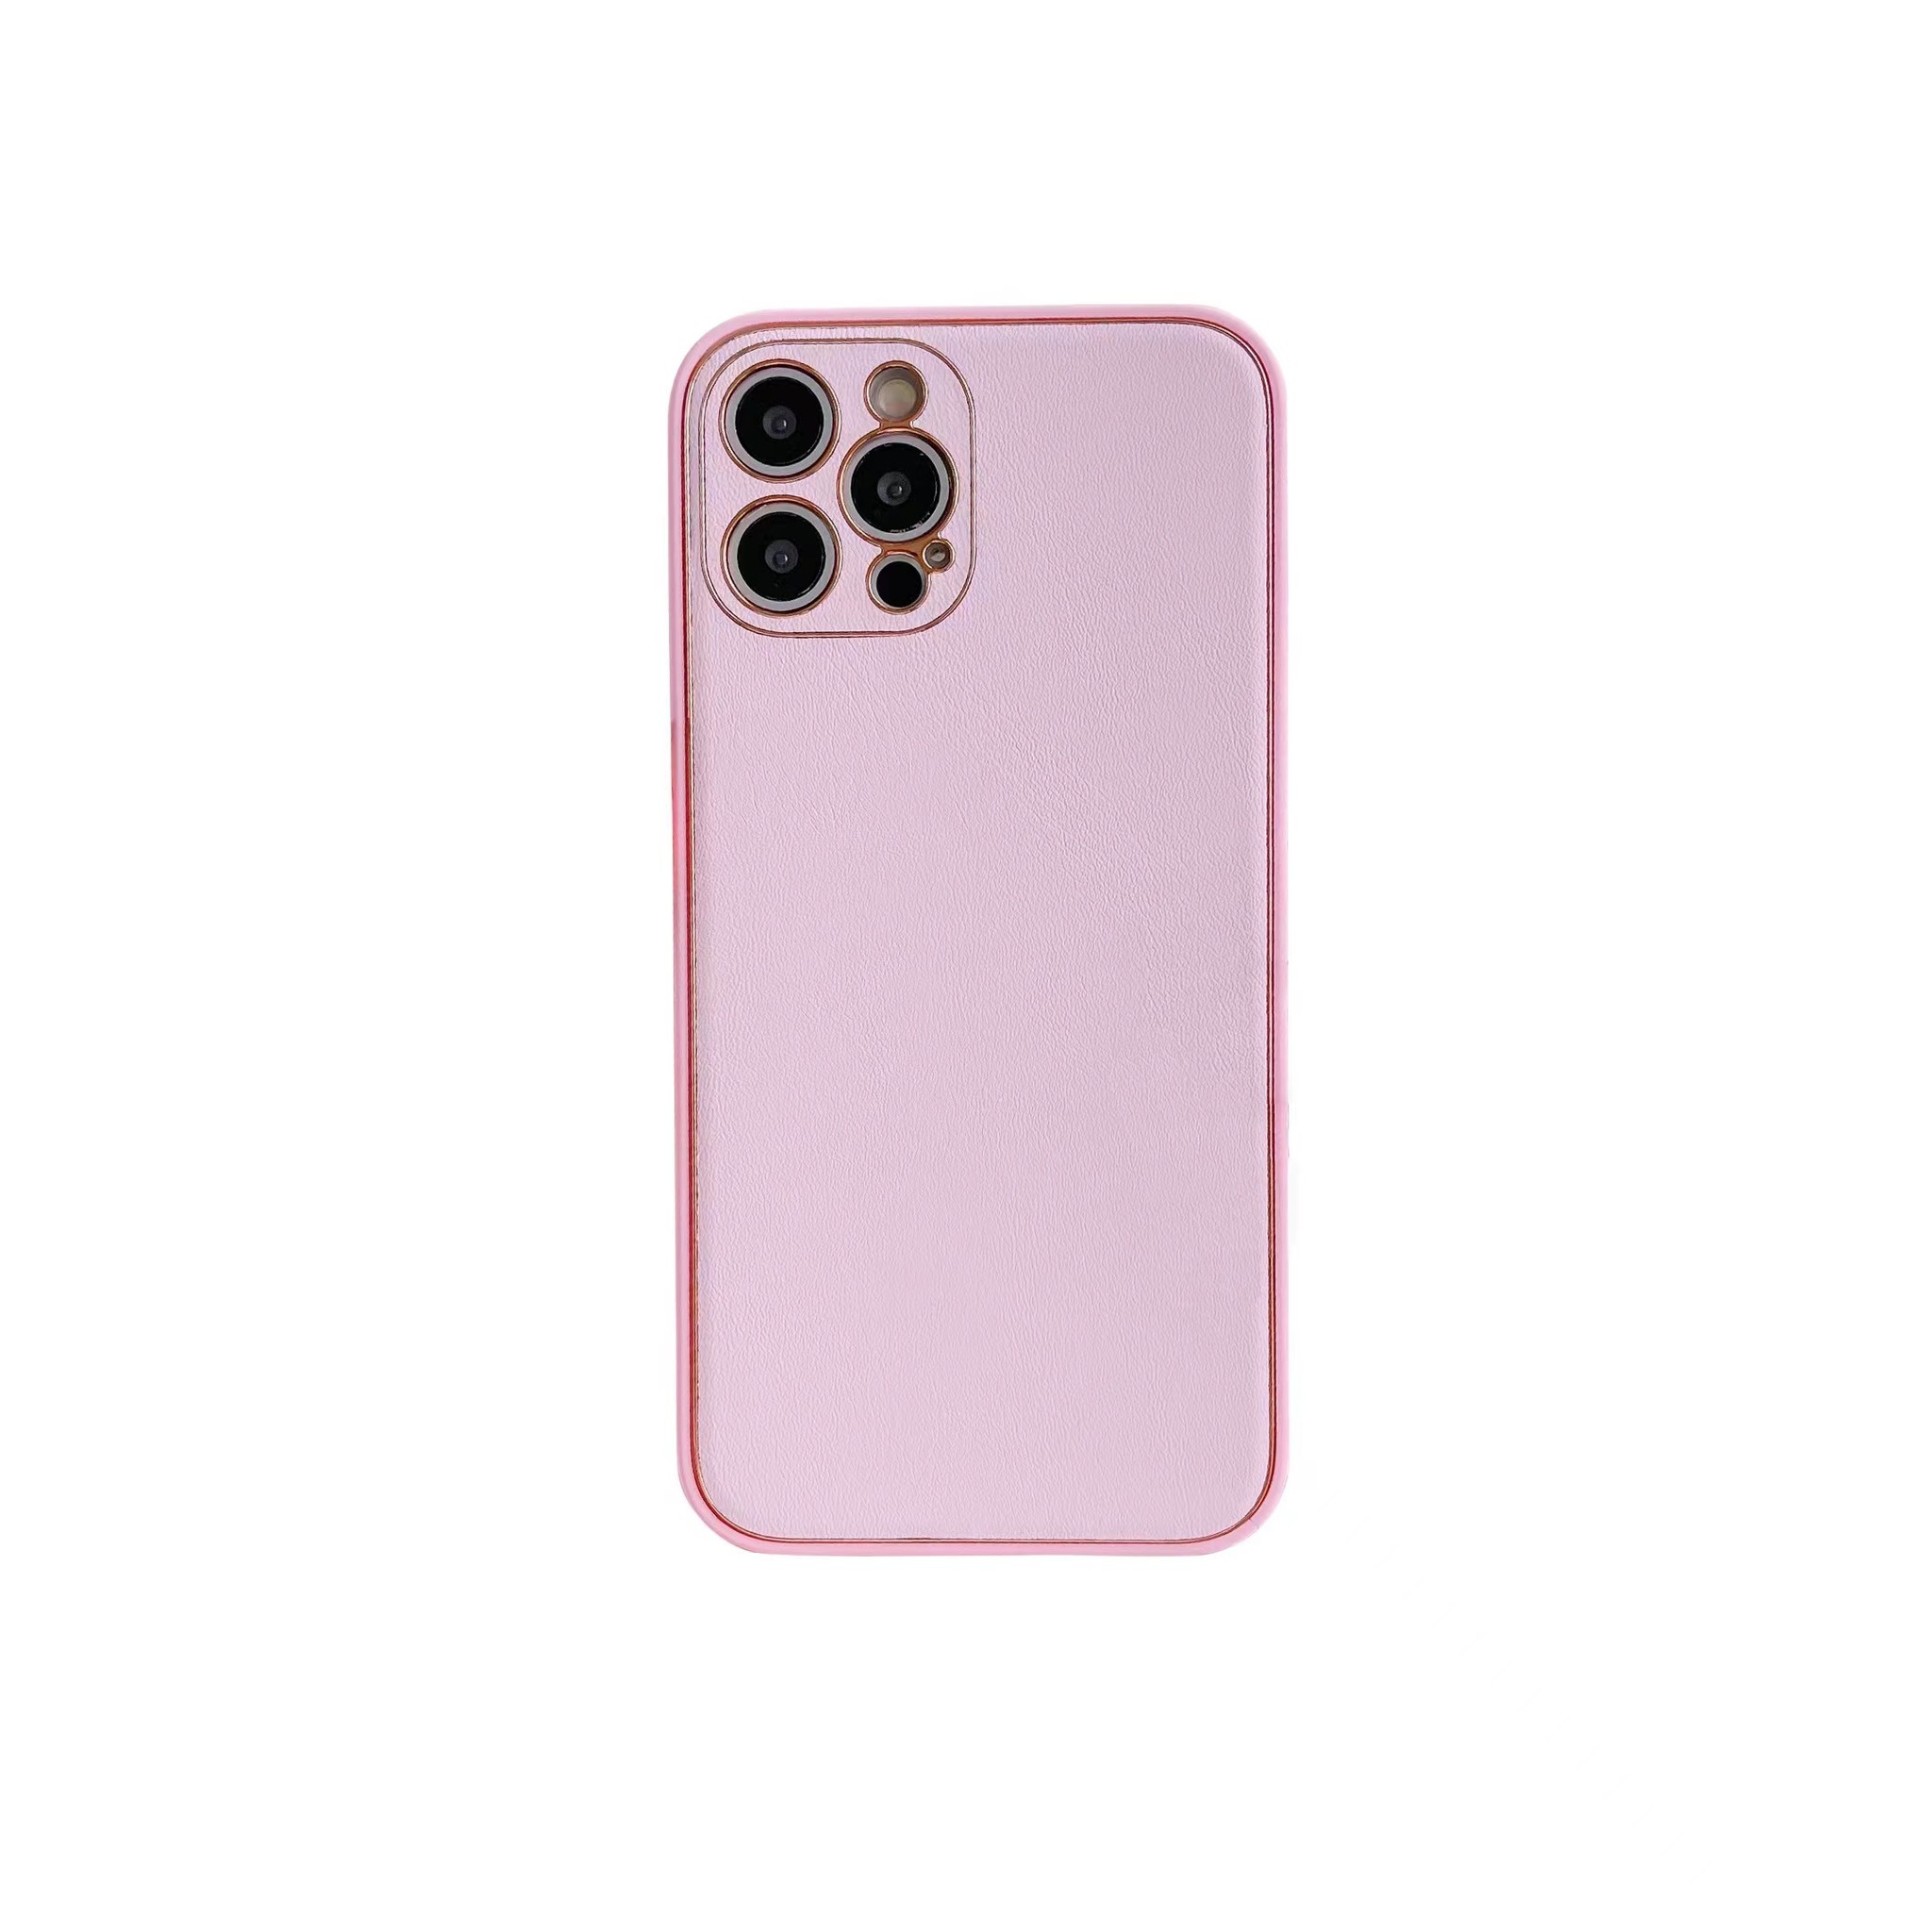 iPhone XS Max Back Cover Hoesje - leer - Luxe - Backcover - Apple iPhone XS Max - Roze/Goud